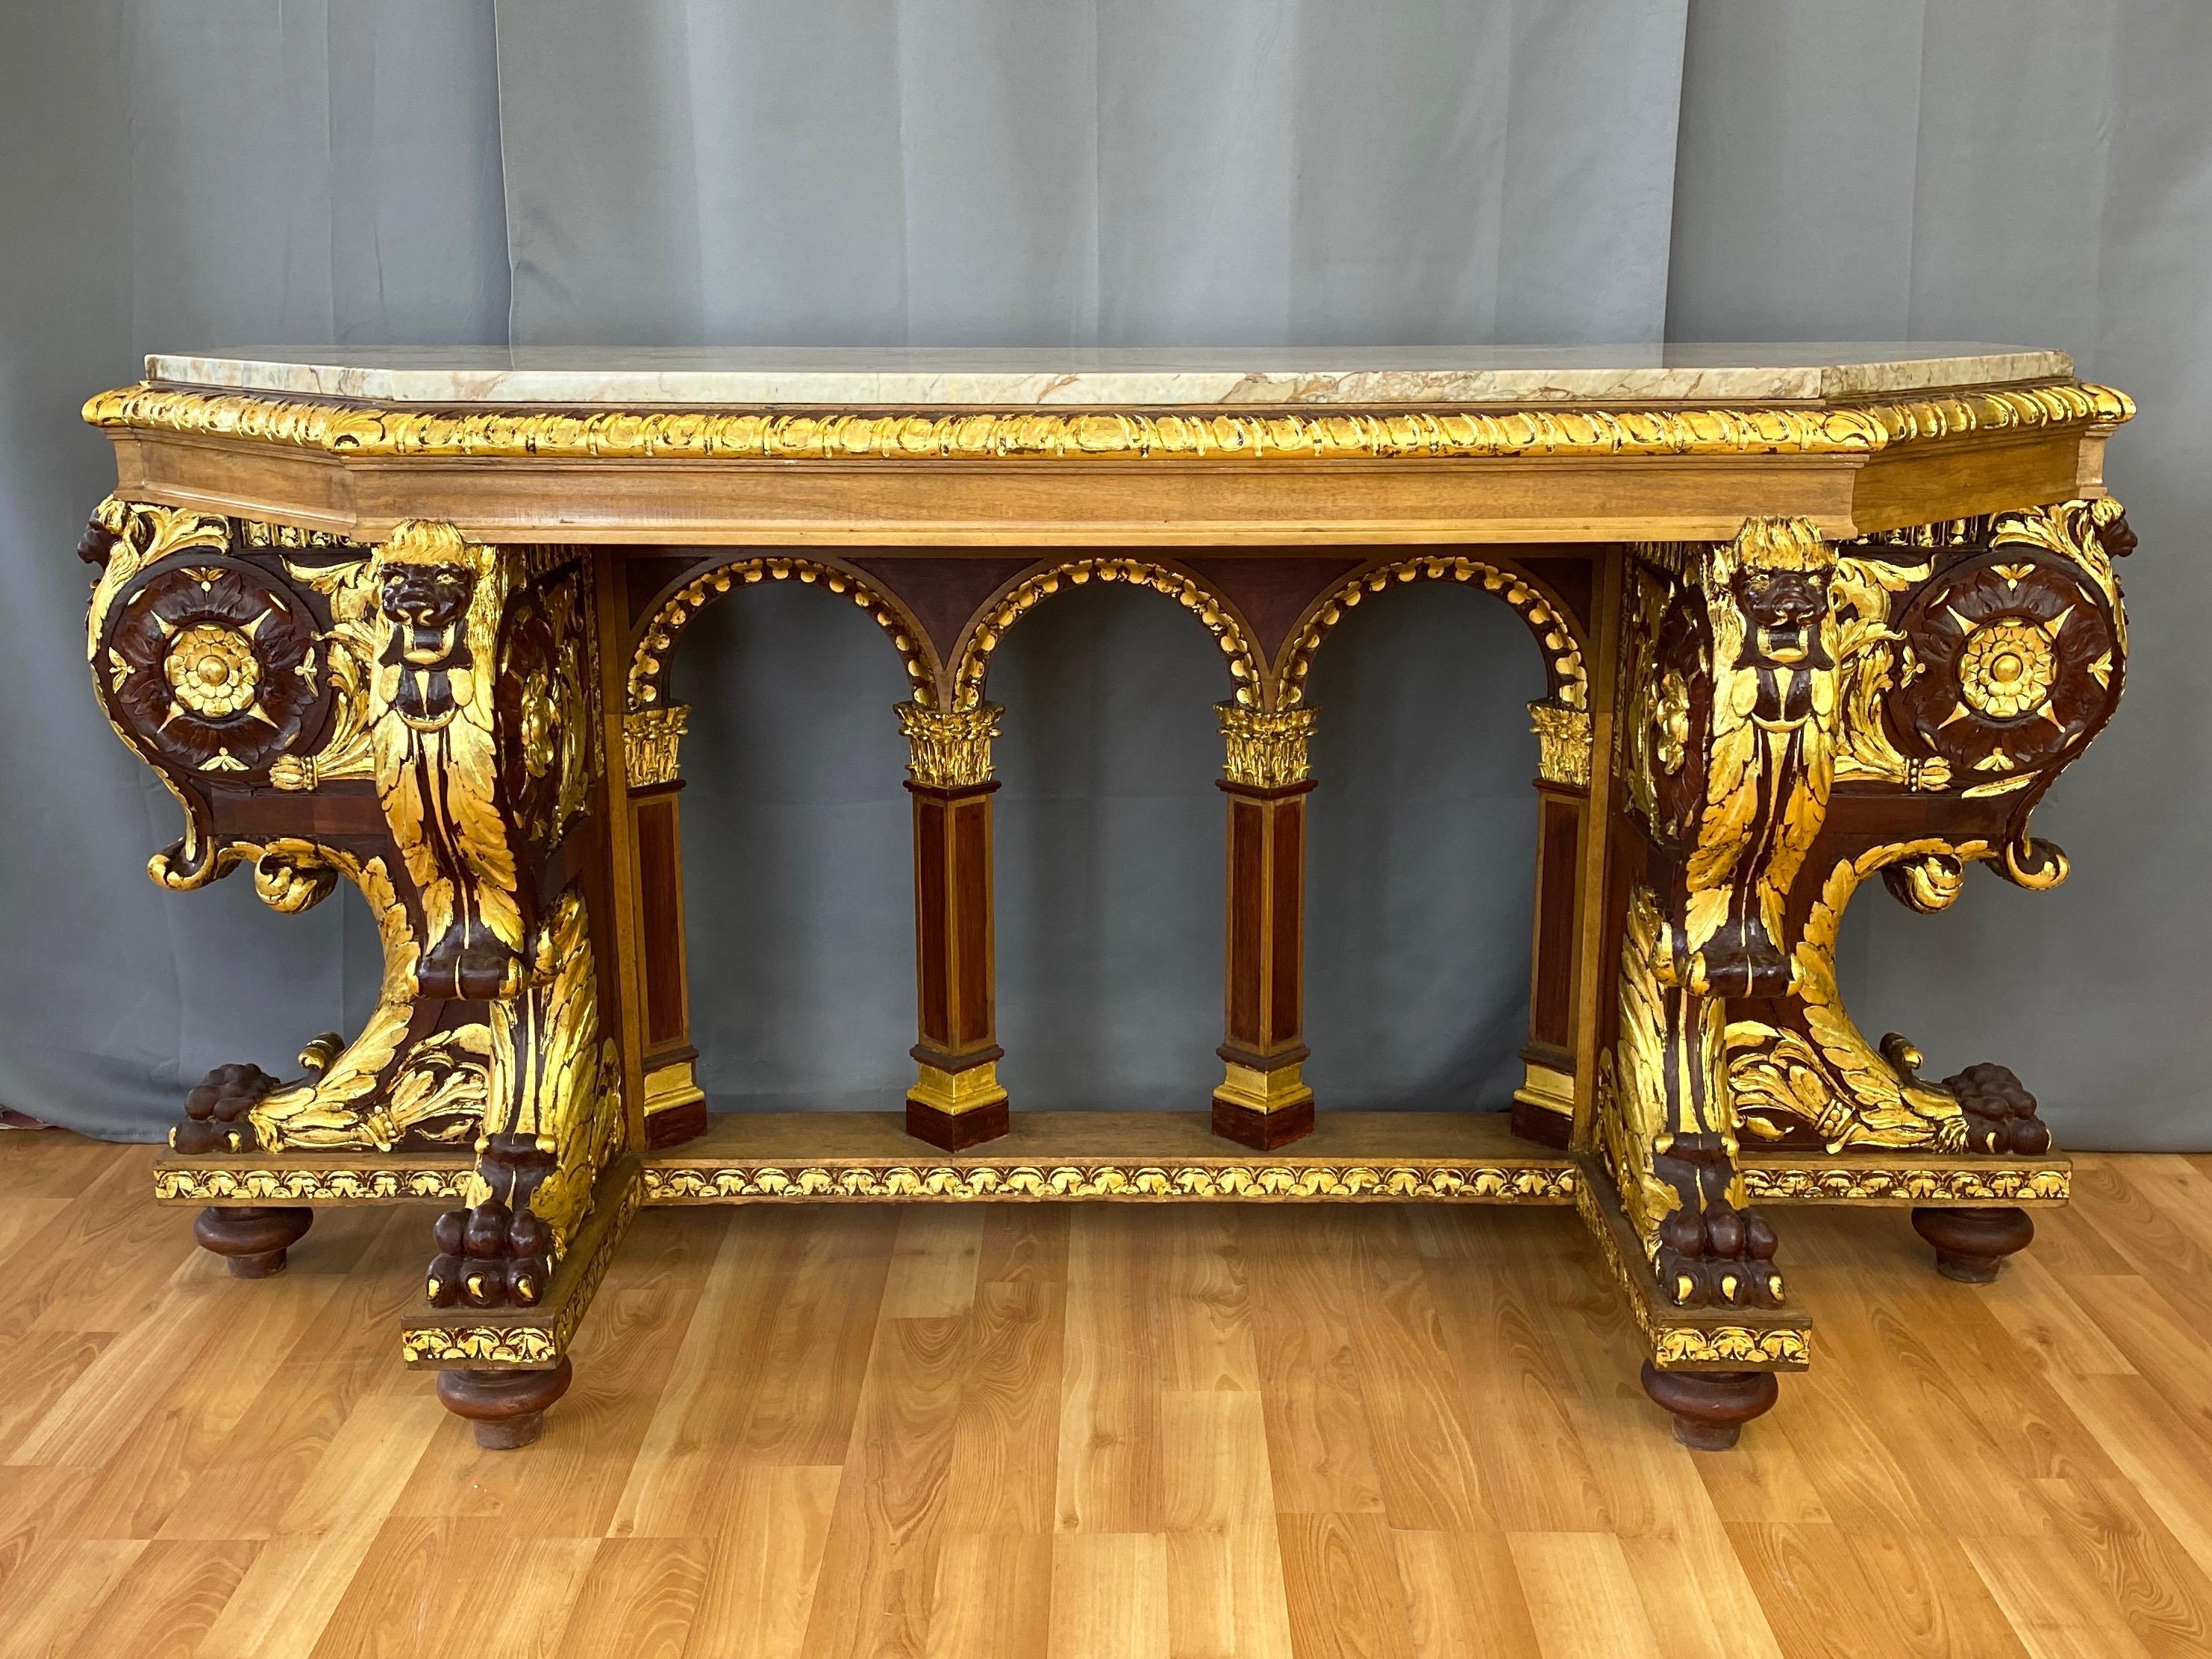 An incredibly grand and commanding early 1900s Regency-style parcel-gilt mahogany console table with marble top, from the historic Fairmont Hotel atop Nob Hill in San Francisco, California.

Impressively sized and well-executed hand-carved solid